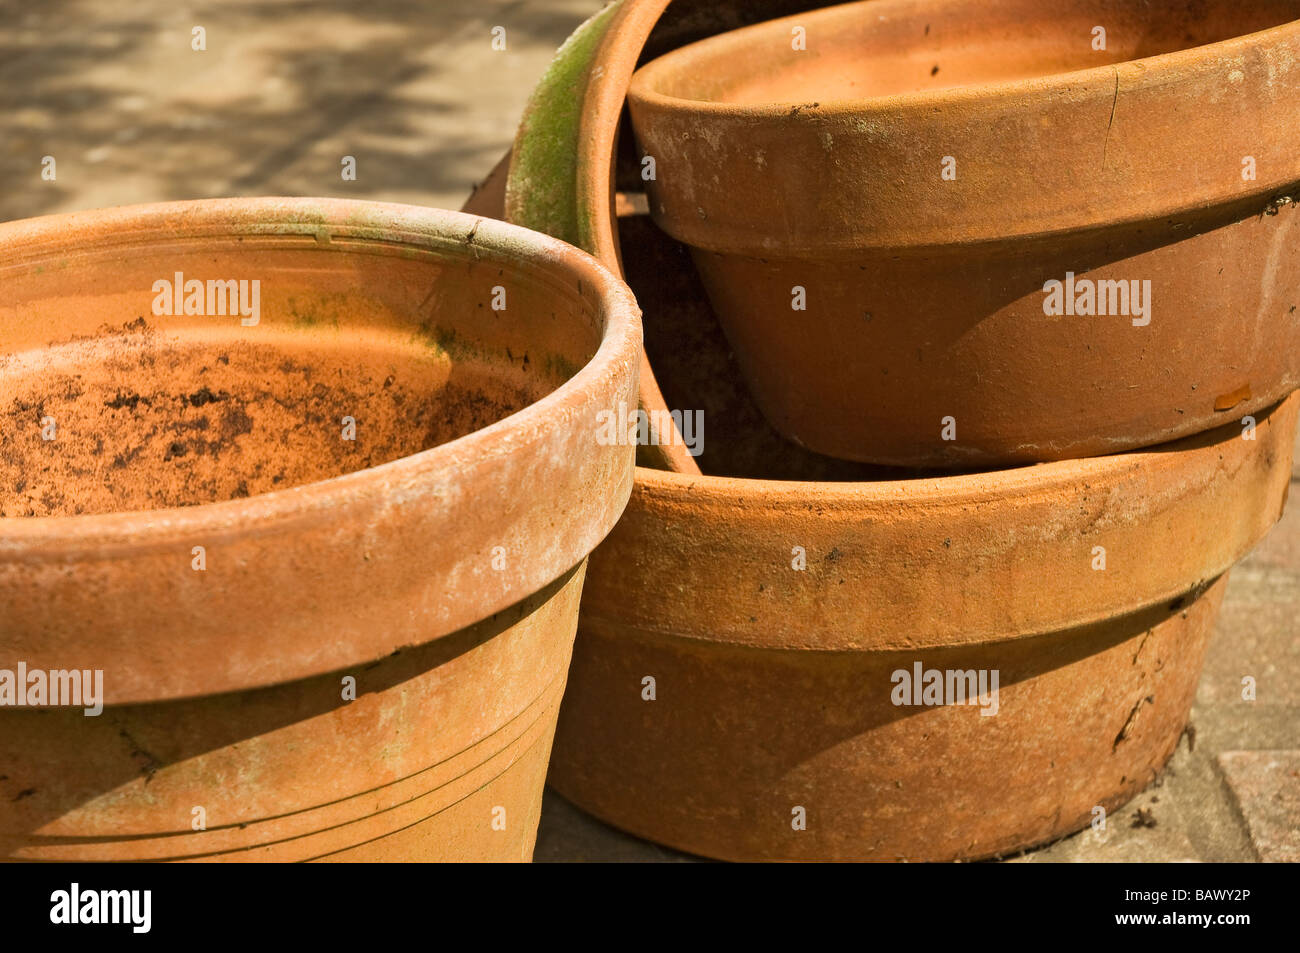 Stack of empty terracotta clay plant pots pot container containers Close up England UK United Kingdom GB Great Britain Stock Photo